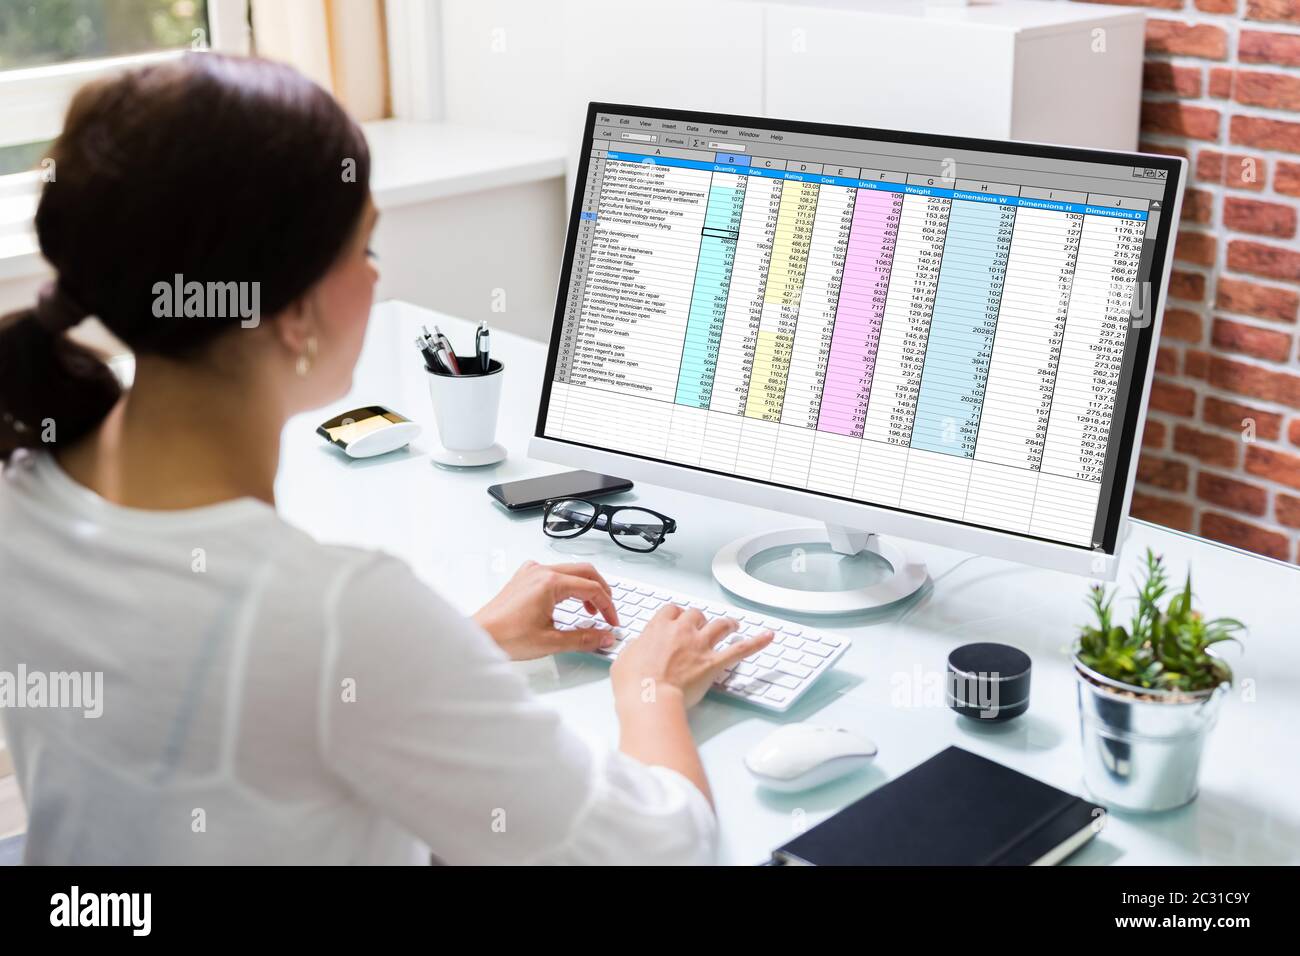 Working With Spreadsheet. Analyzing Data On Laptop Screen Stock Photo